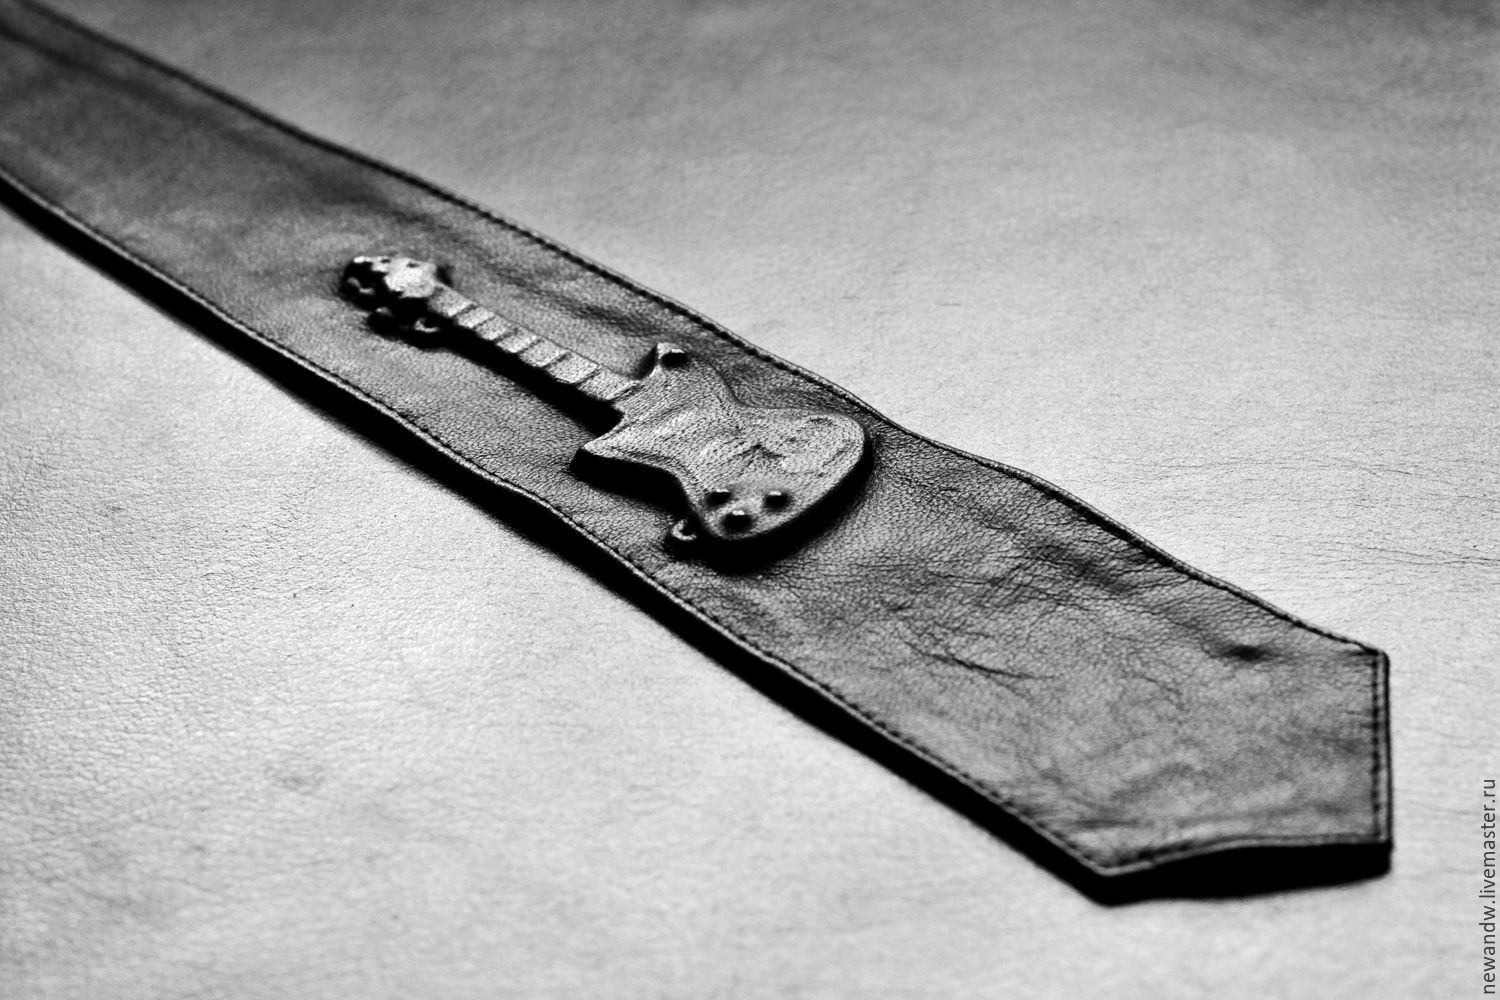 3D bow Tie 'Guitar' from a black natural leather, Ties, Moscow,  Фото №1